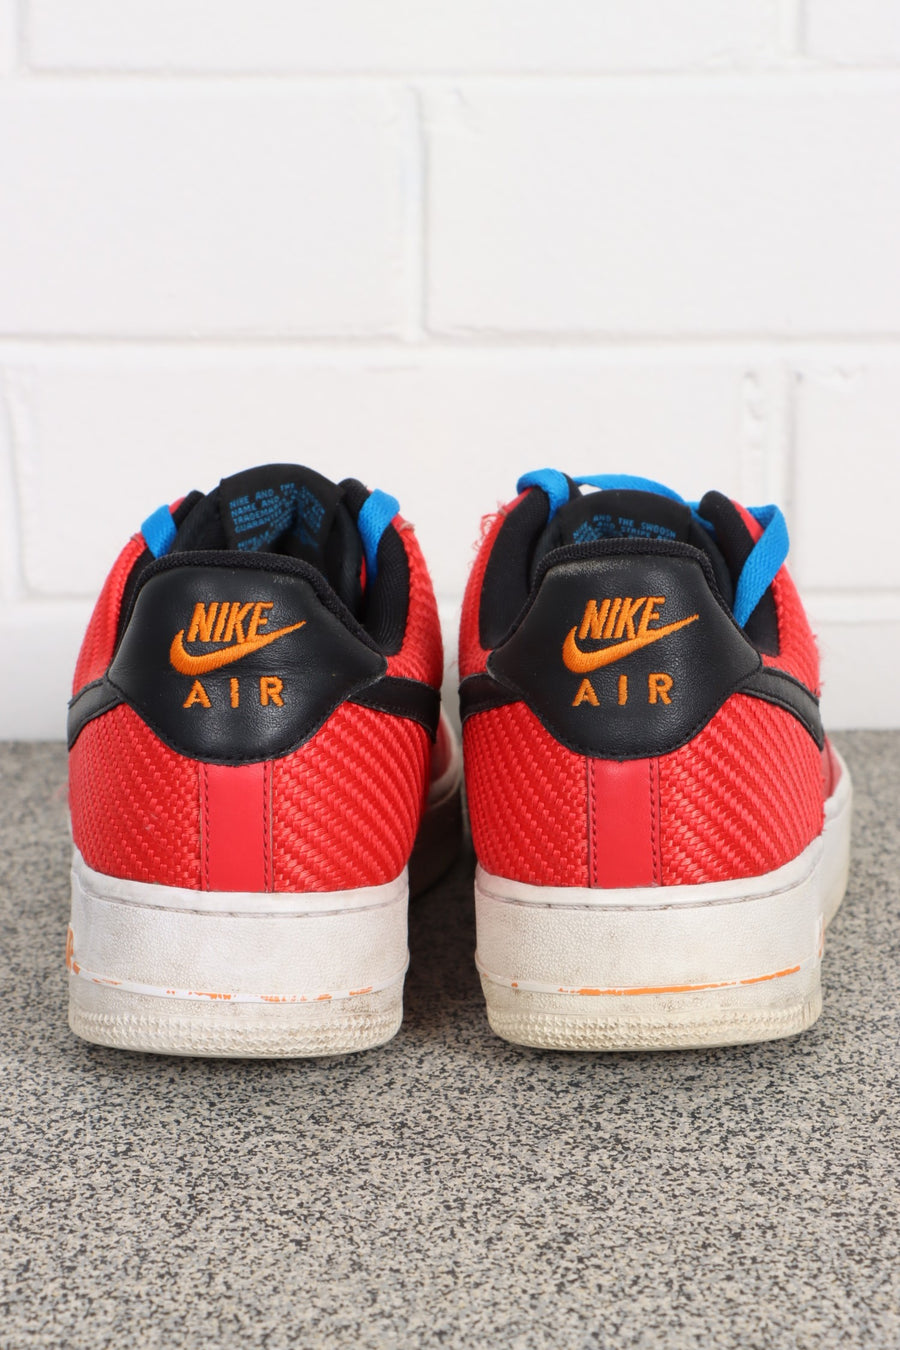 NIKE Air Force 1 'Barcelona' Challenge Red/Black Low Sneakers (11.5)